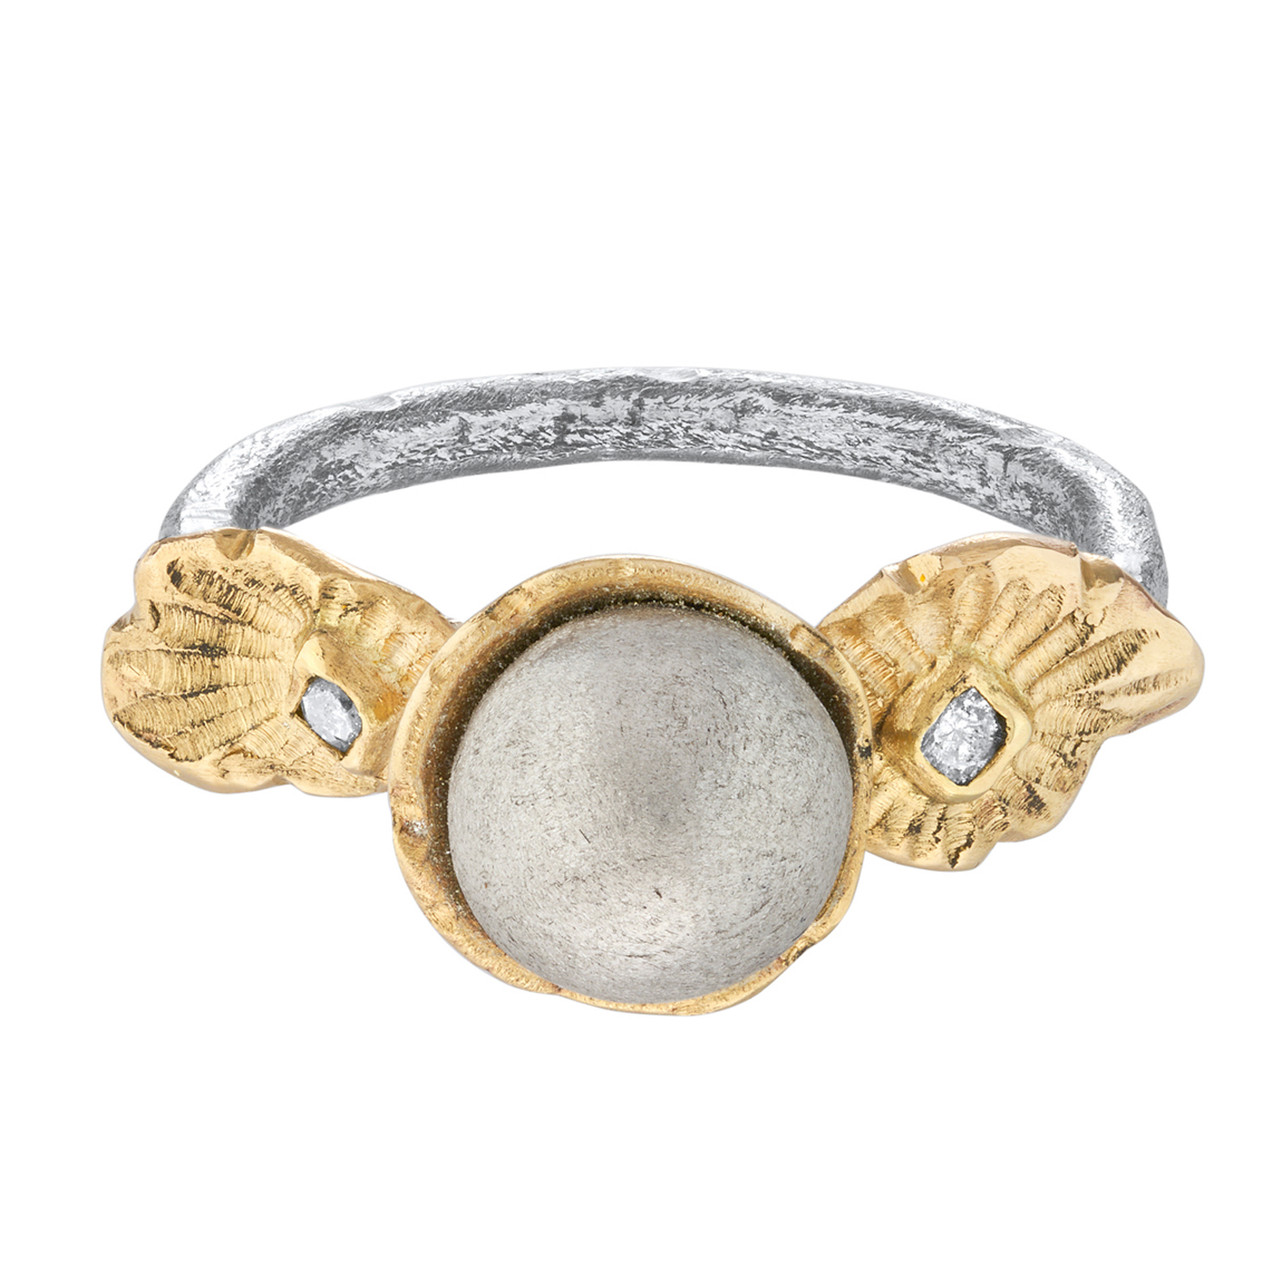 "A Forever LOVE" Ring in Silver & 14ct Yellow Gold, Franny E, tomfoolery